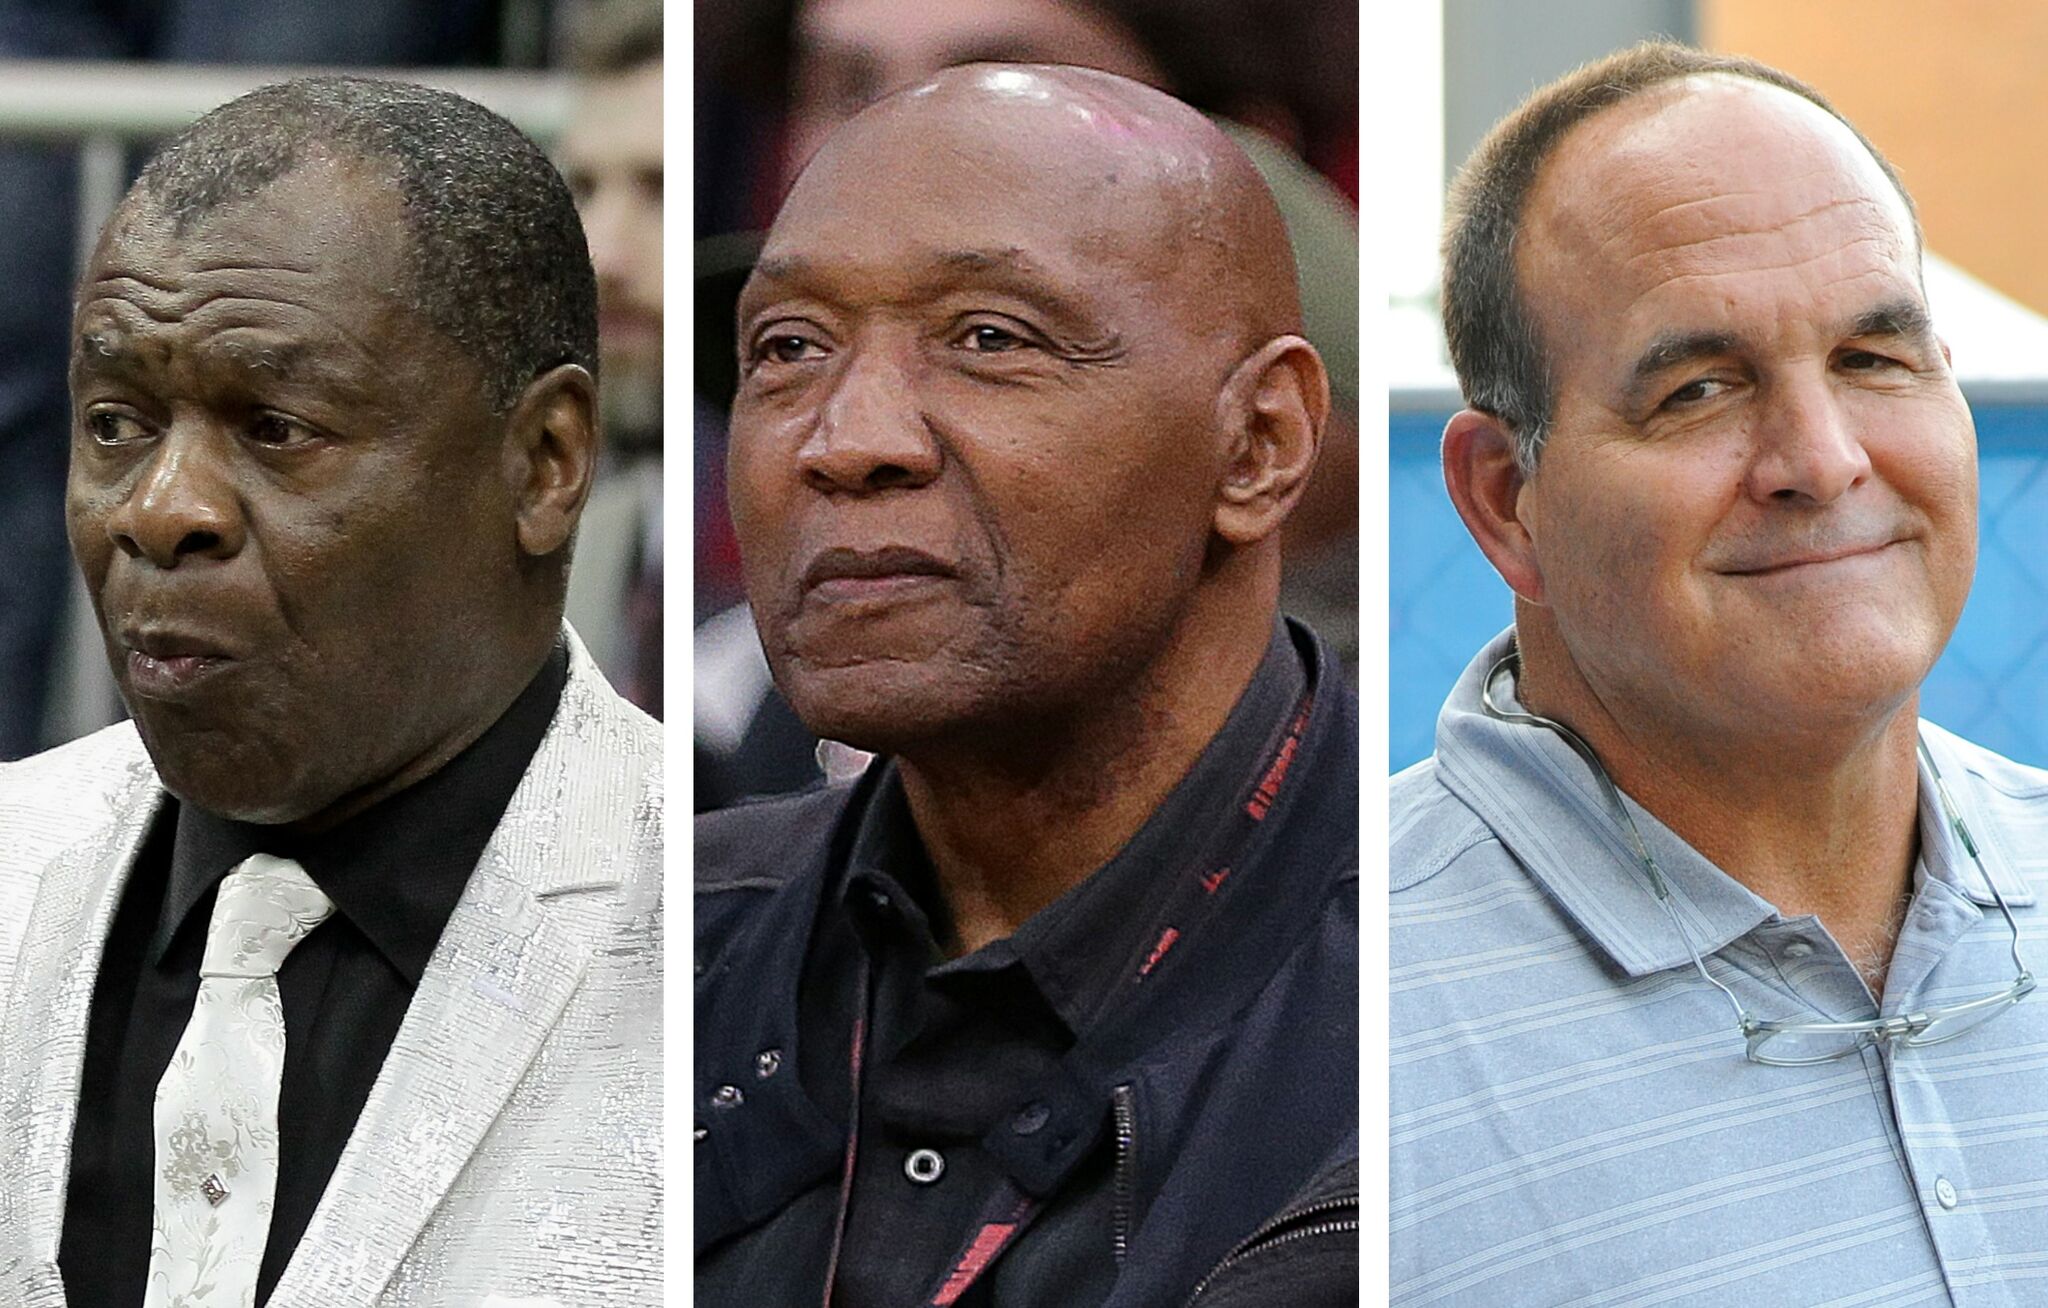 Houston Sports Hall of Fame adds Carl Lewis, Mary Lou Retton, Rudy  Tomjanovich